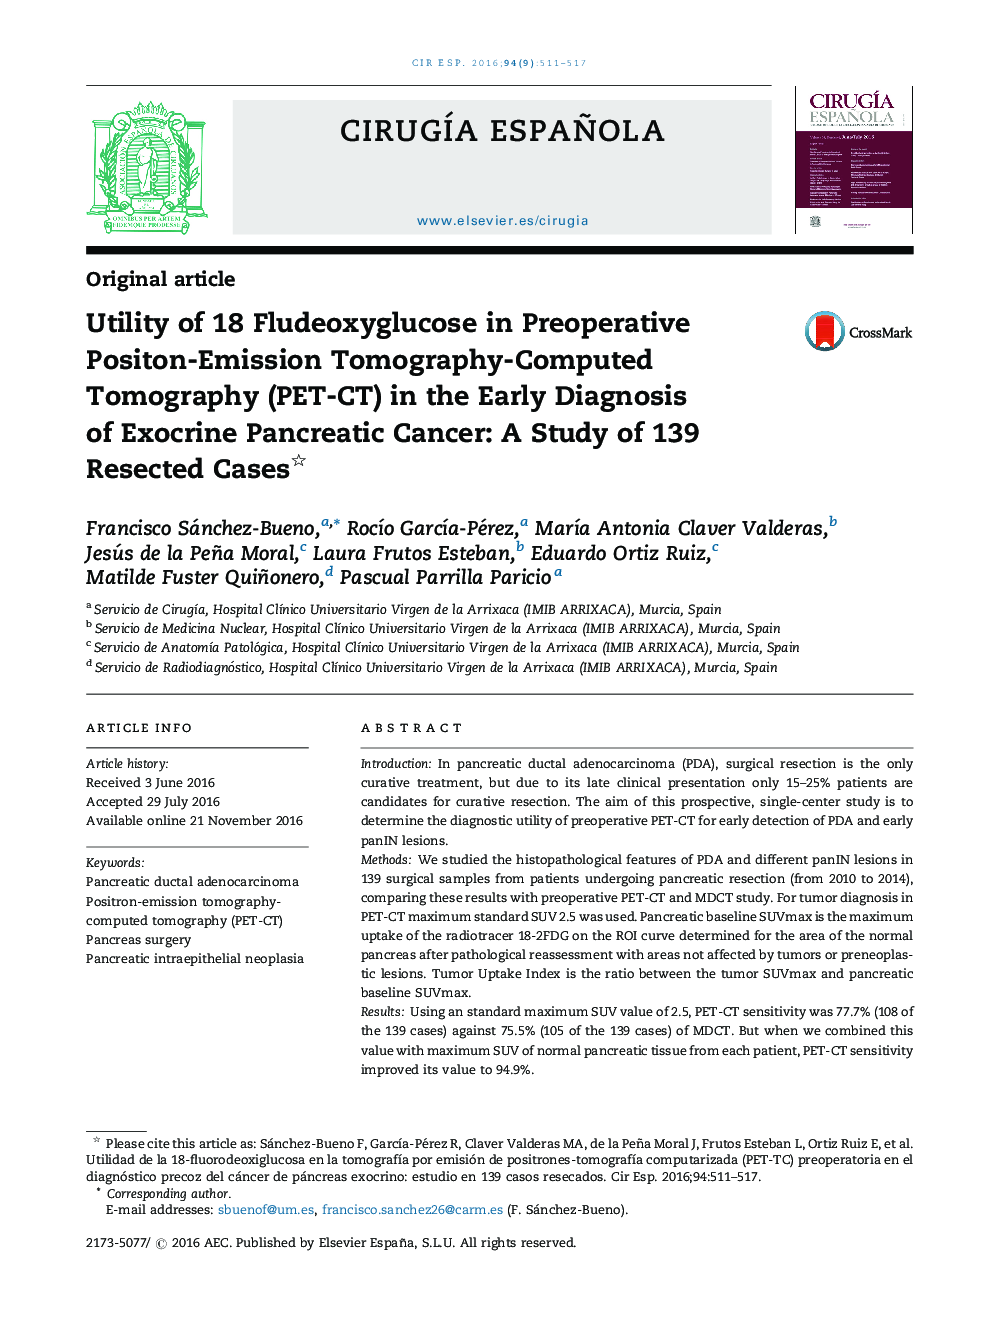 Utility of 18 Fludeoxyglucose in Preoperative Positon-Emission Tomography-Computed Tomography (PET-CT) in the Early Diagnosis of Exocrine Pancreatic Cancer: A Study of 139 Resected Cases